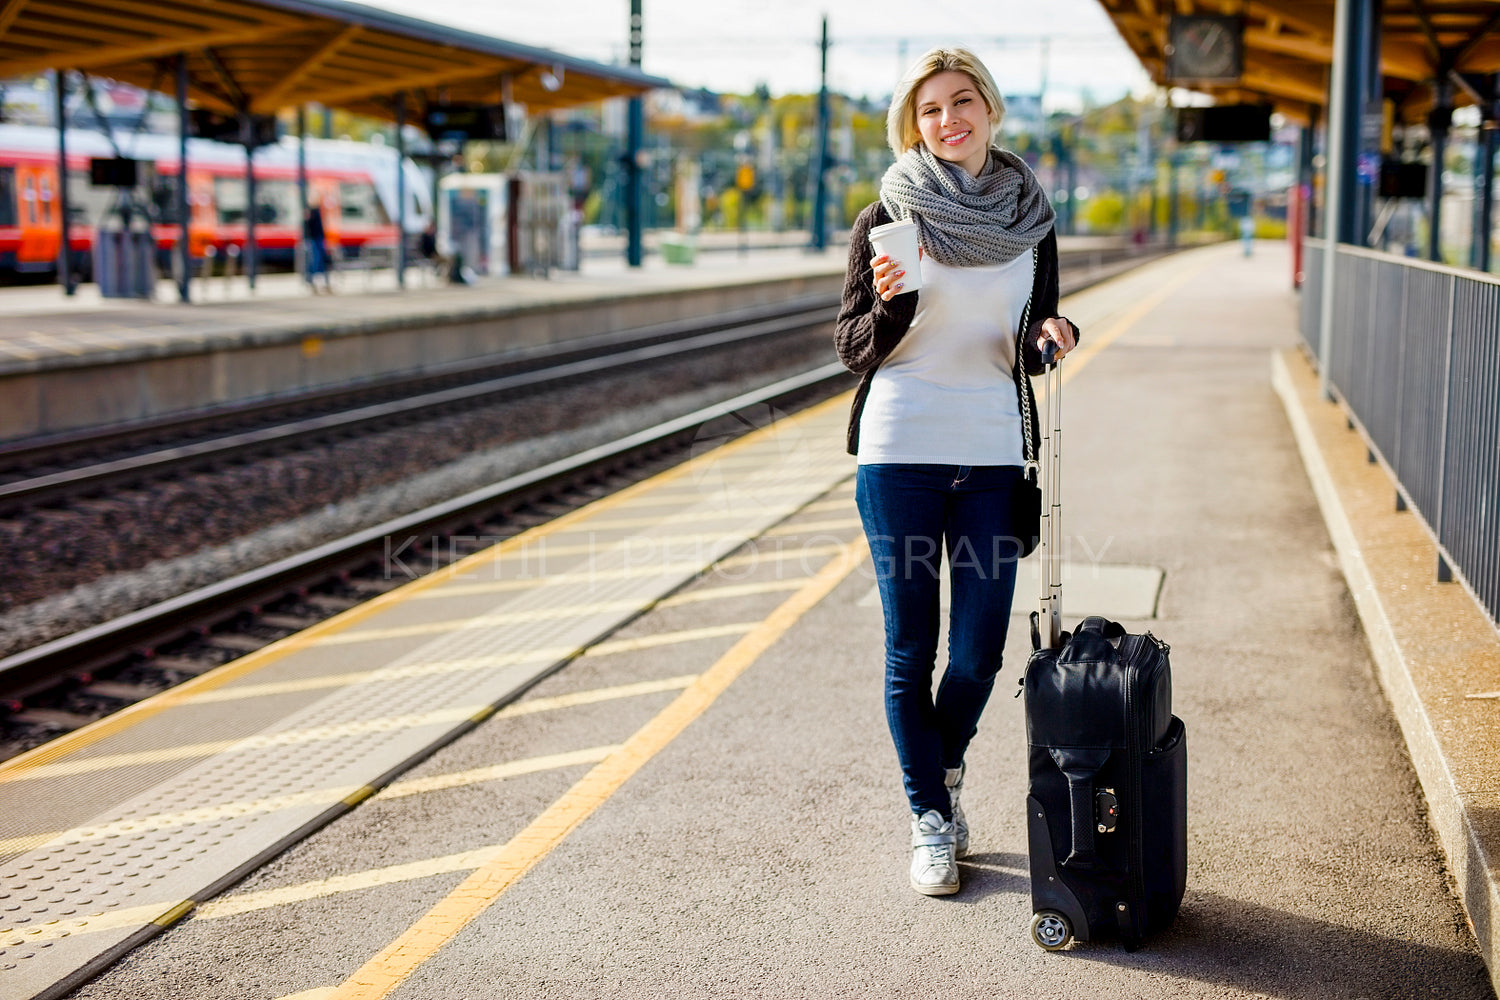 Woman With Luggage And Coffee Cup Waiting At Train Station